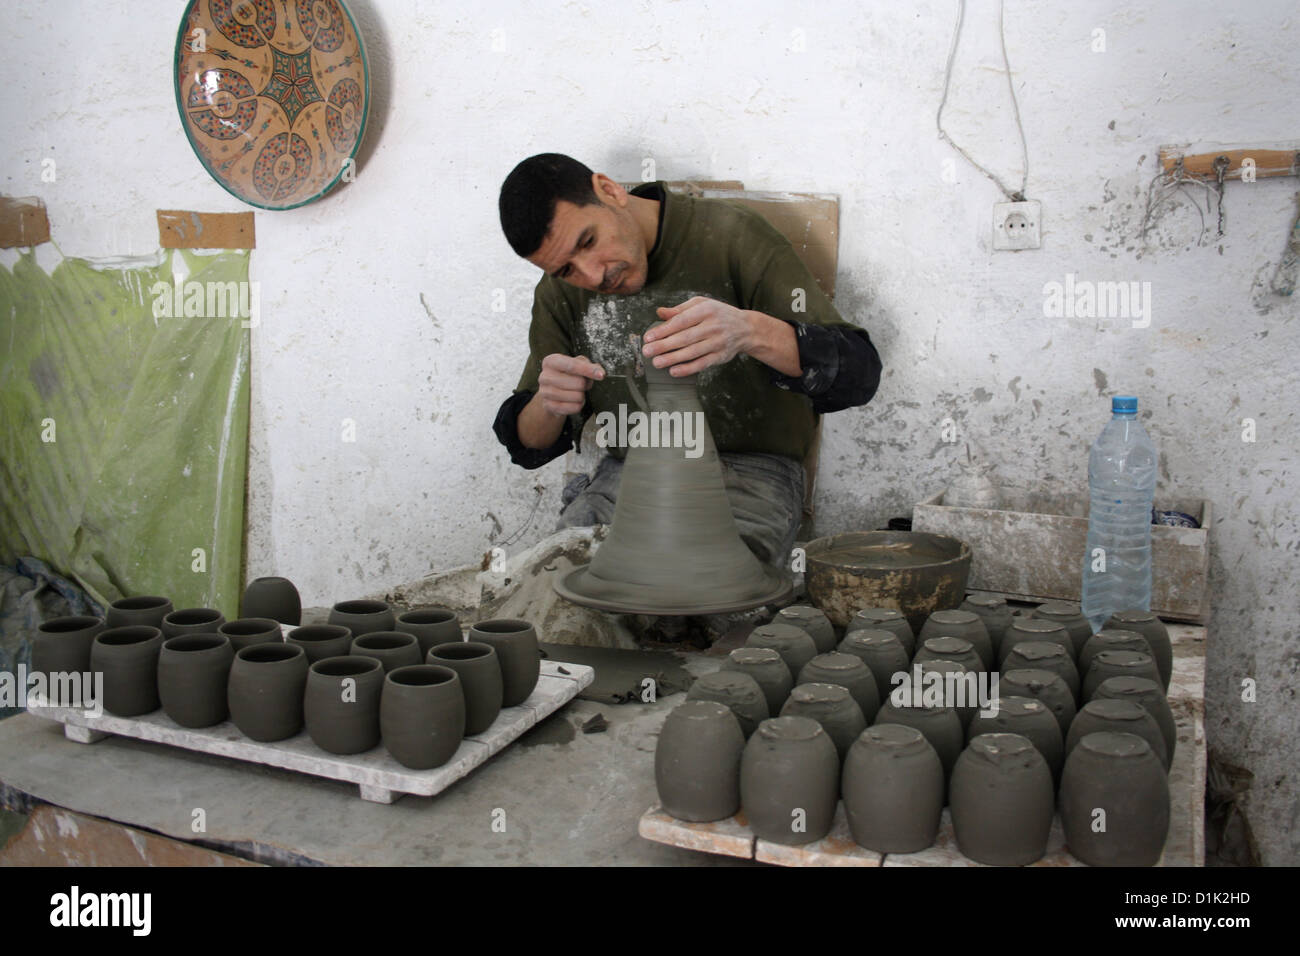 A workman crafts a pot at a pottery in Fez, Morocco Stock Photo